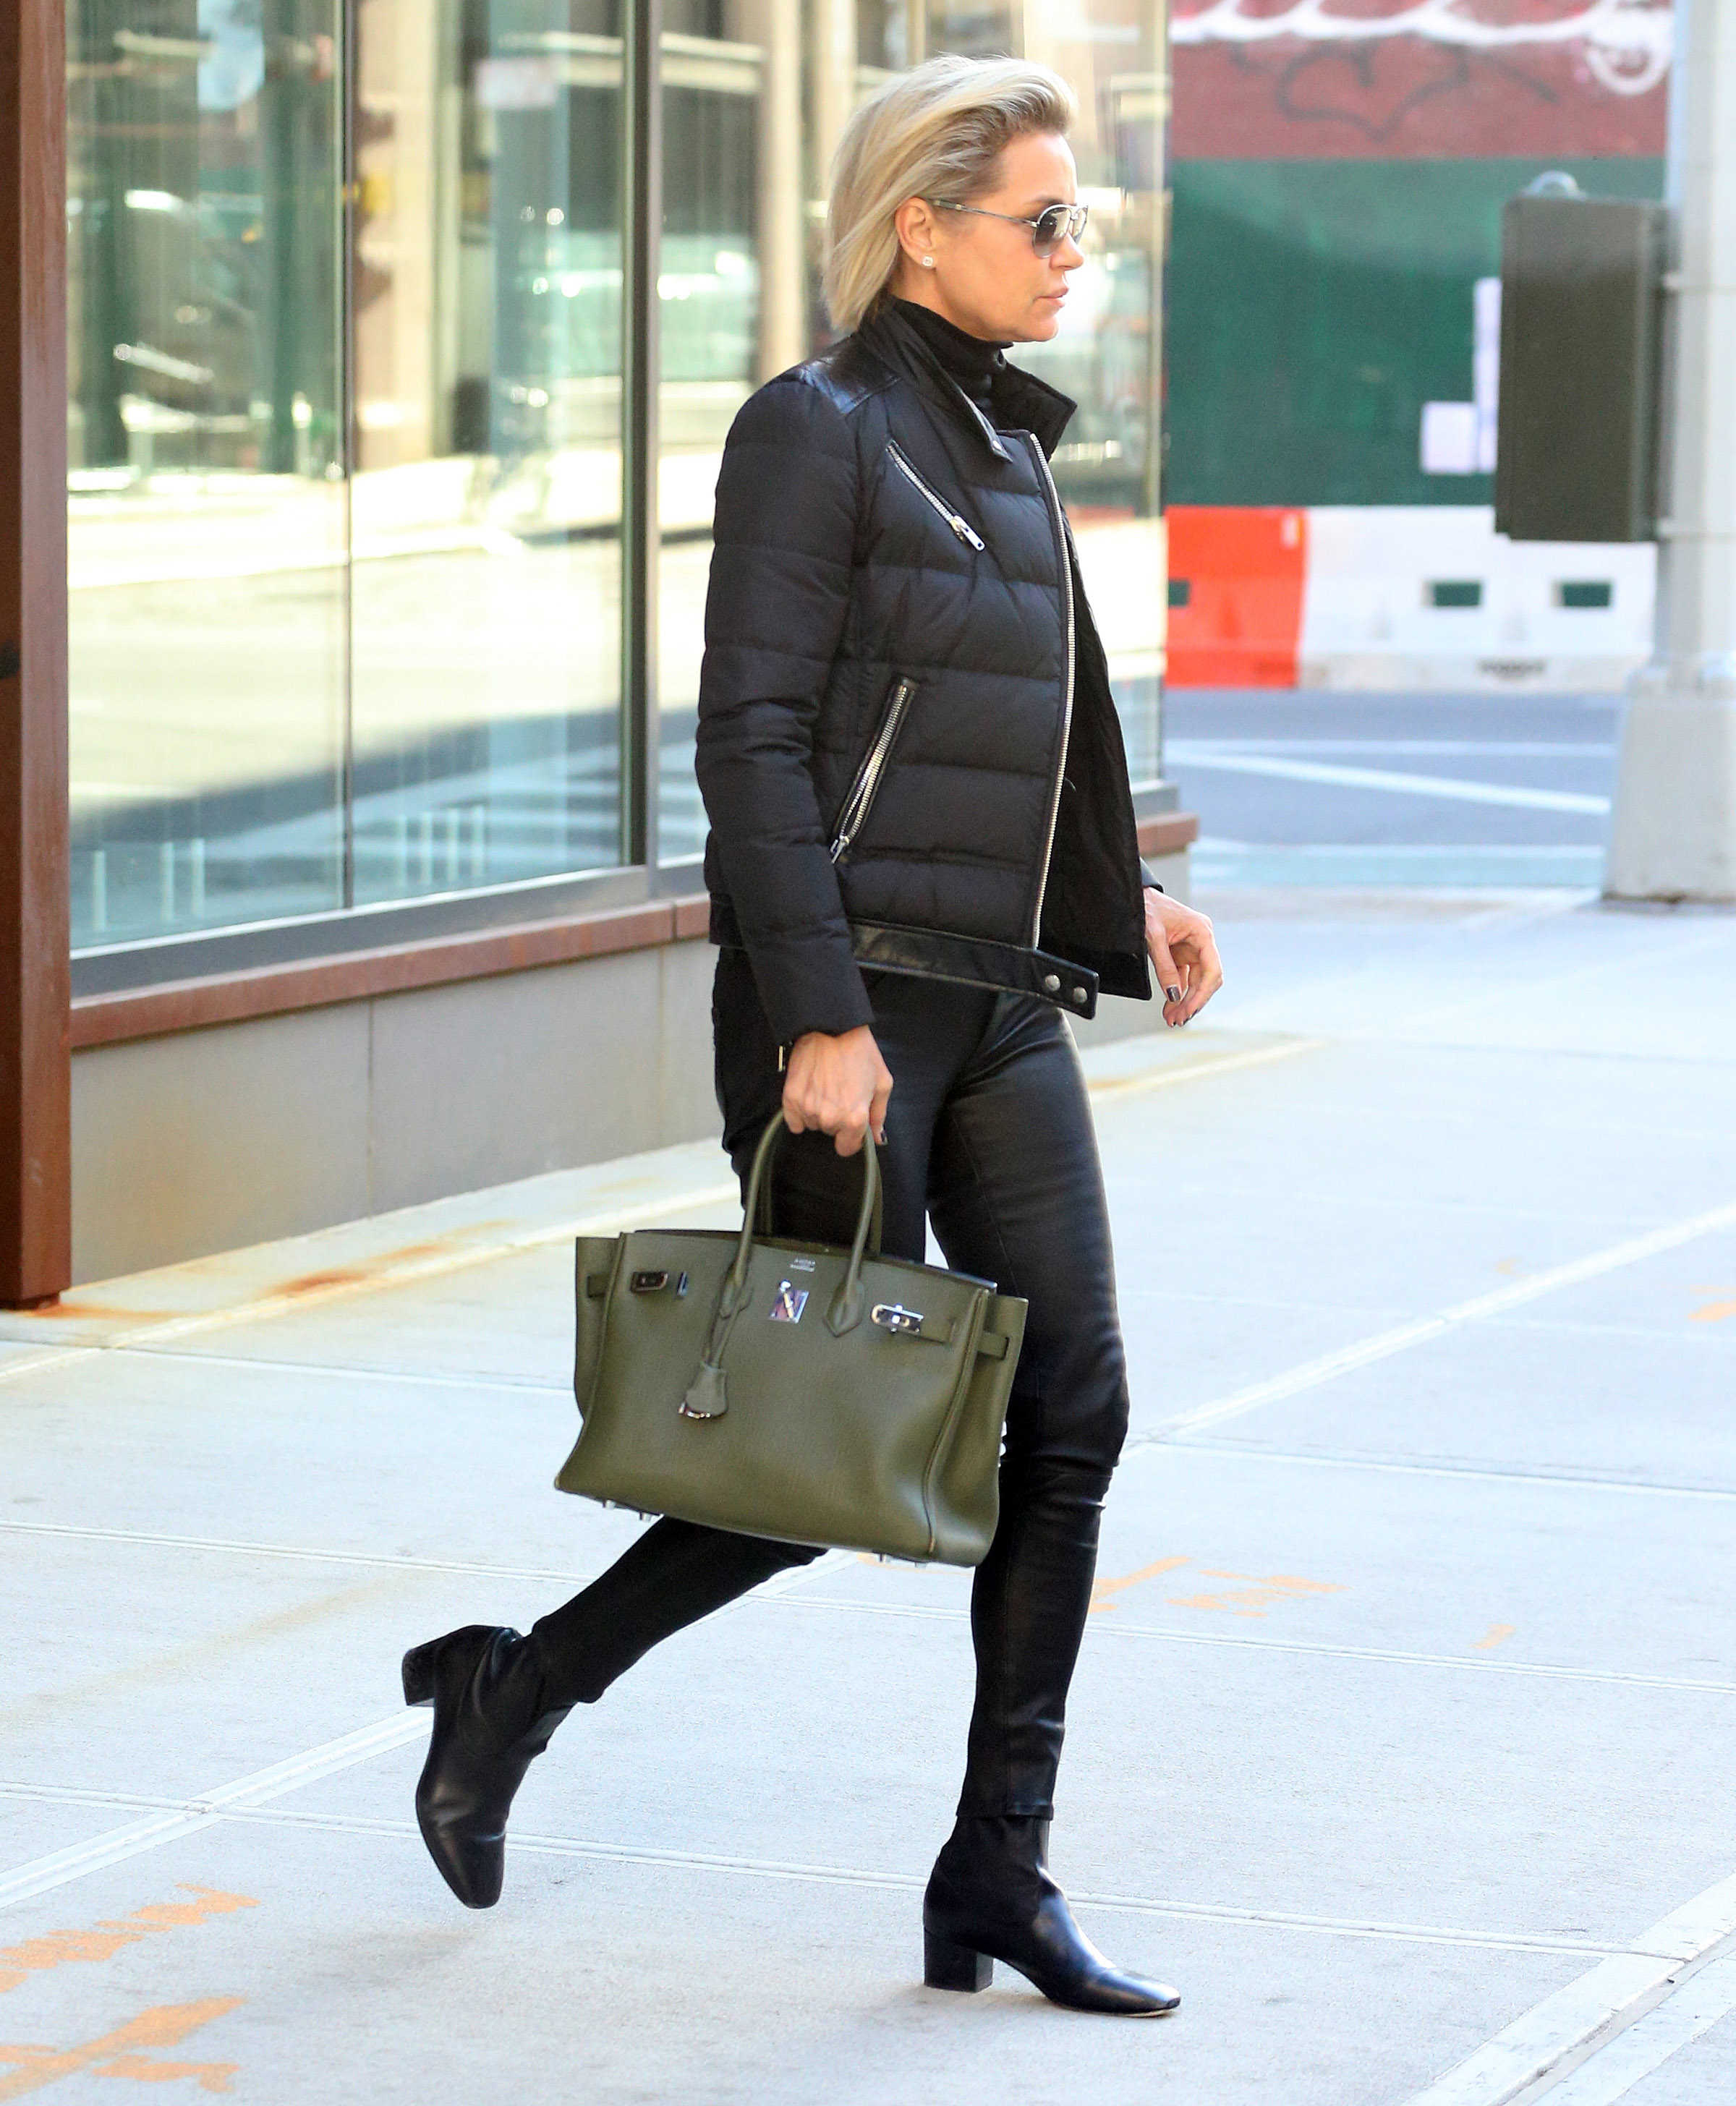 Yolanda Hadid out & about in NYC